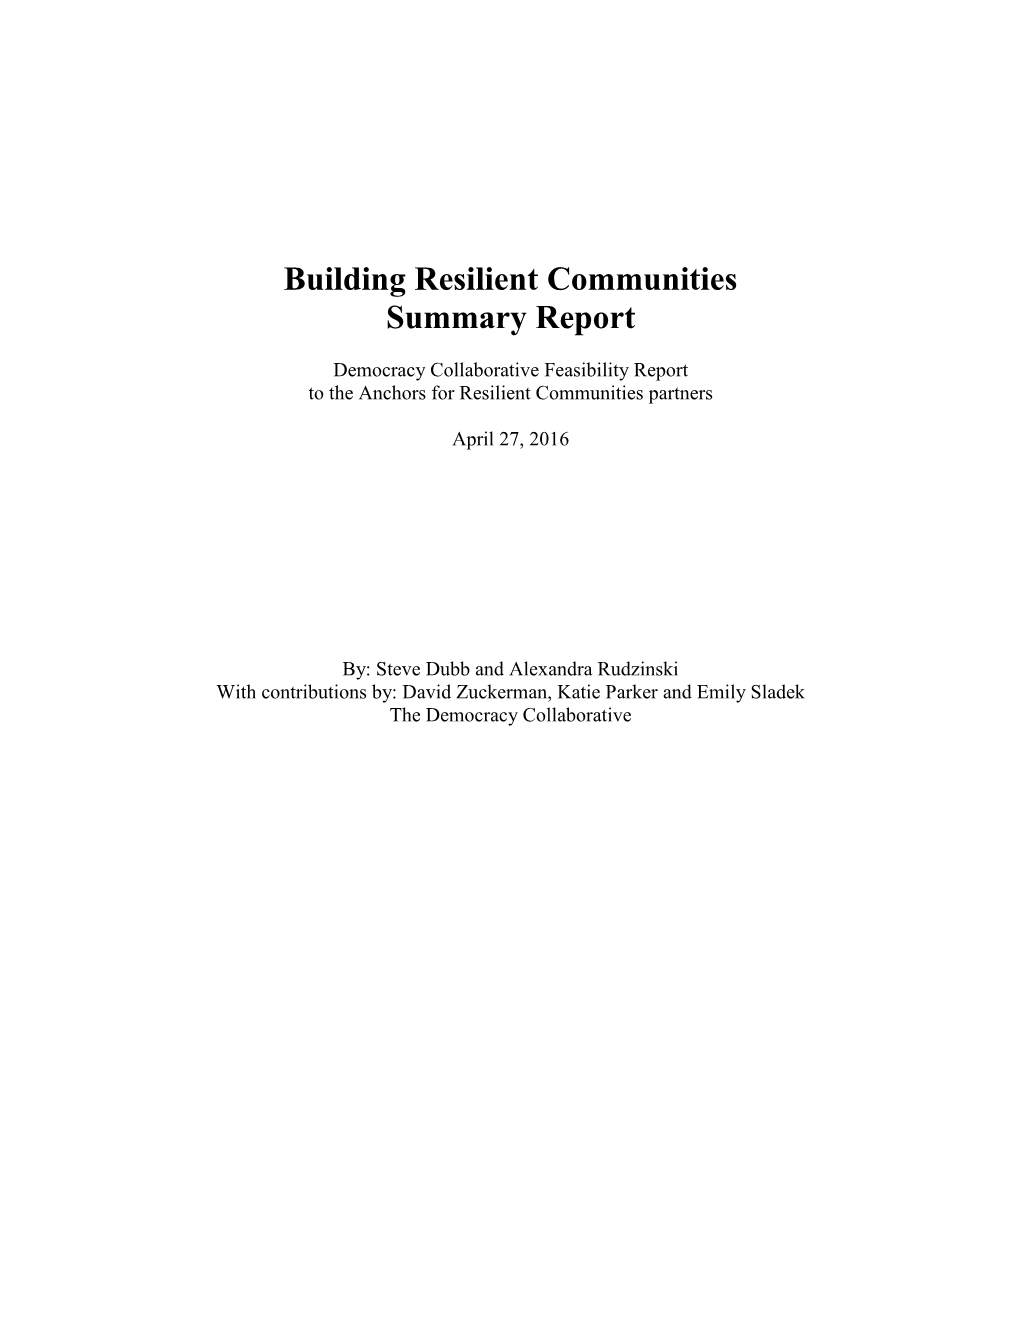 Building Resilient Communities Summary Report